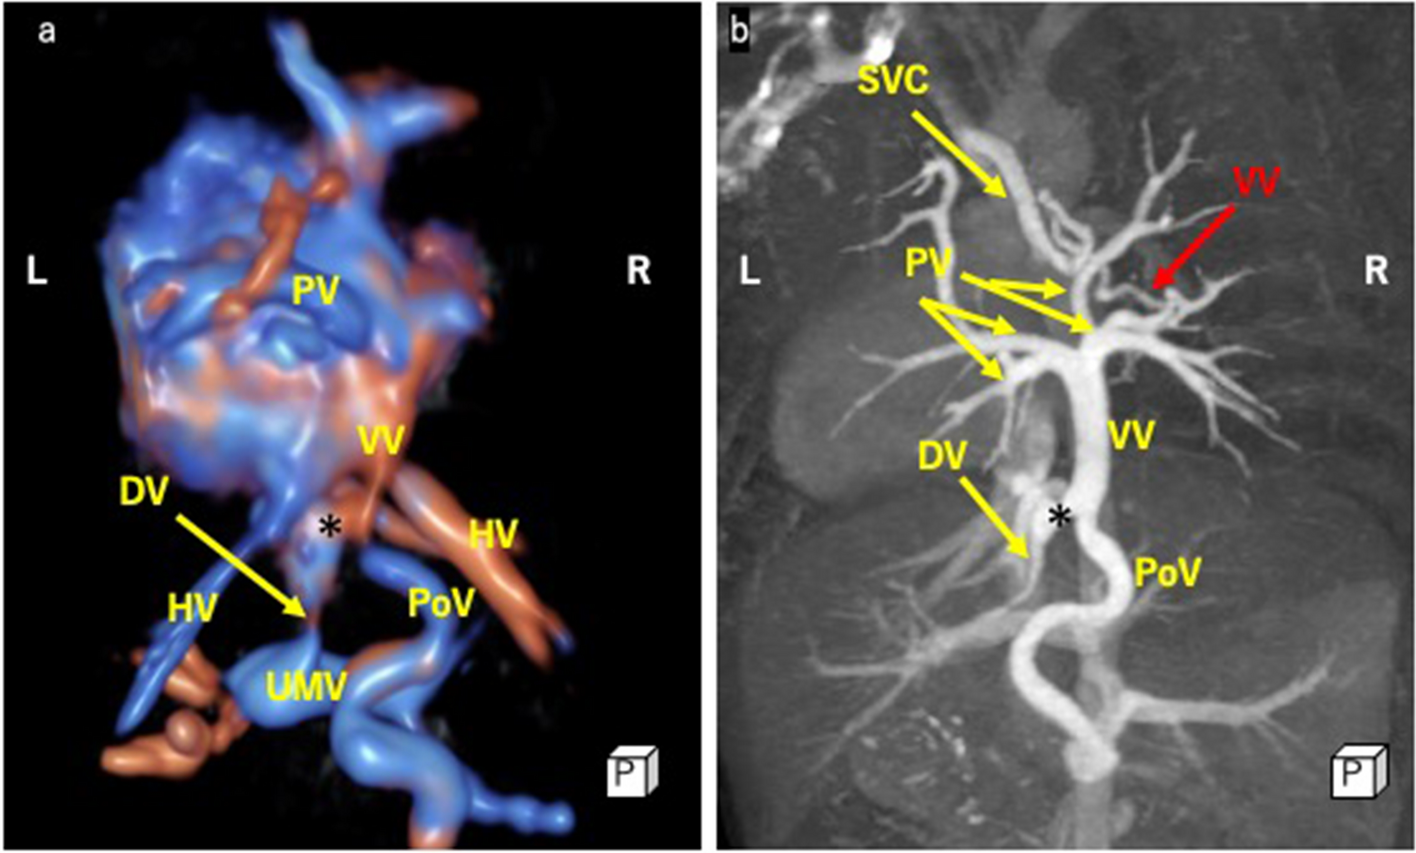 Prenatal diagnosis of total anomalous pulmonary venous connection with vertical vein branching into two